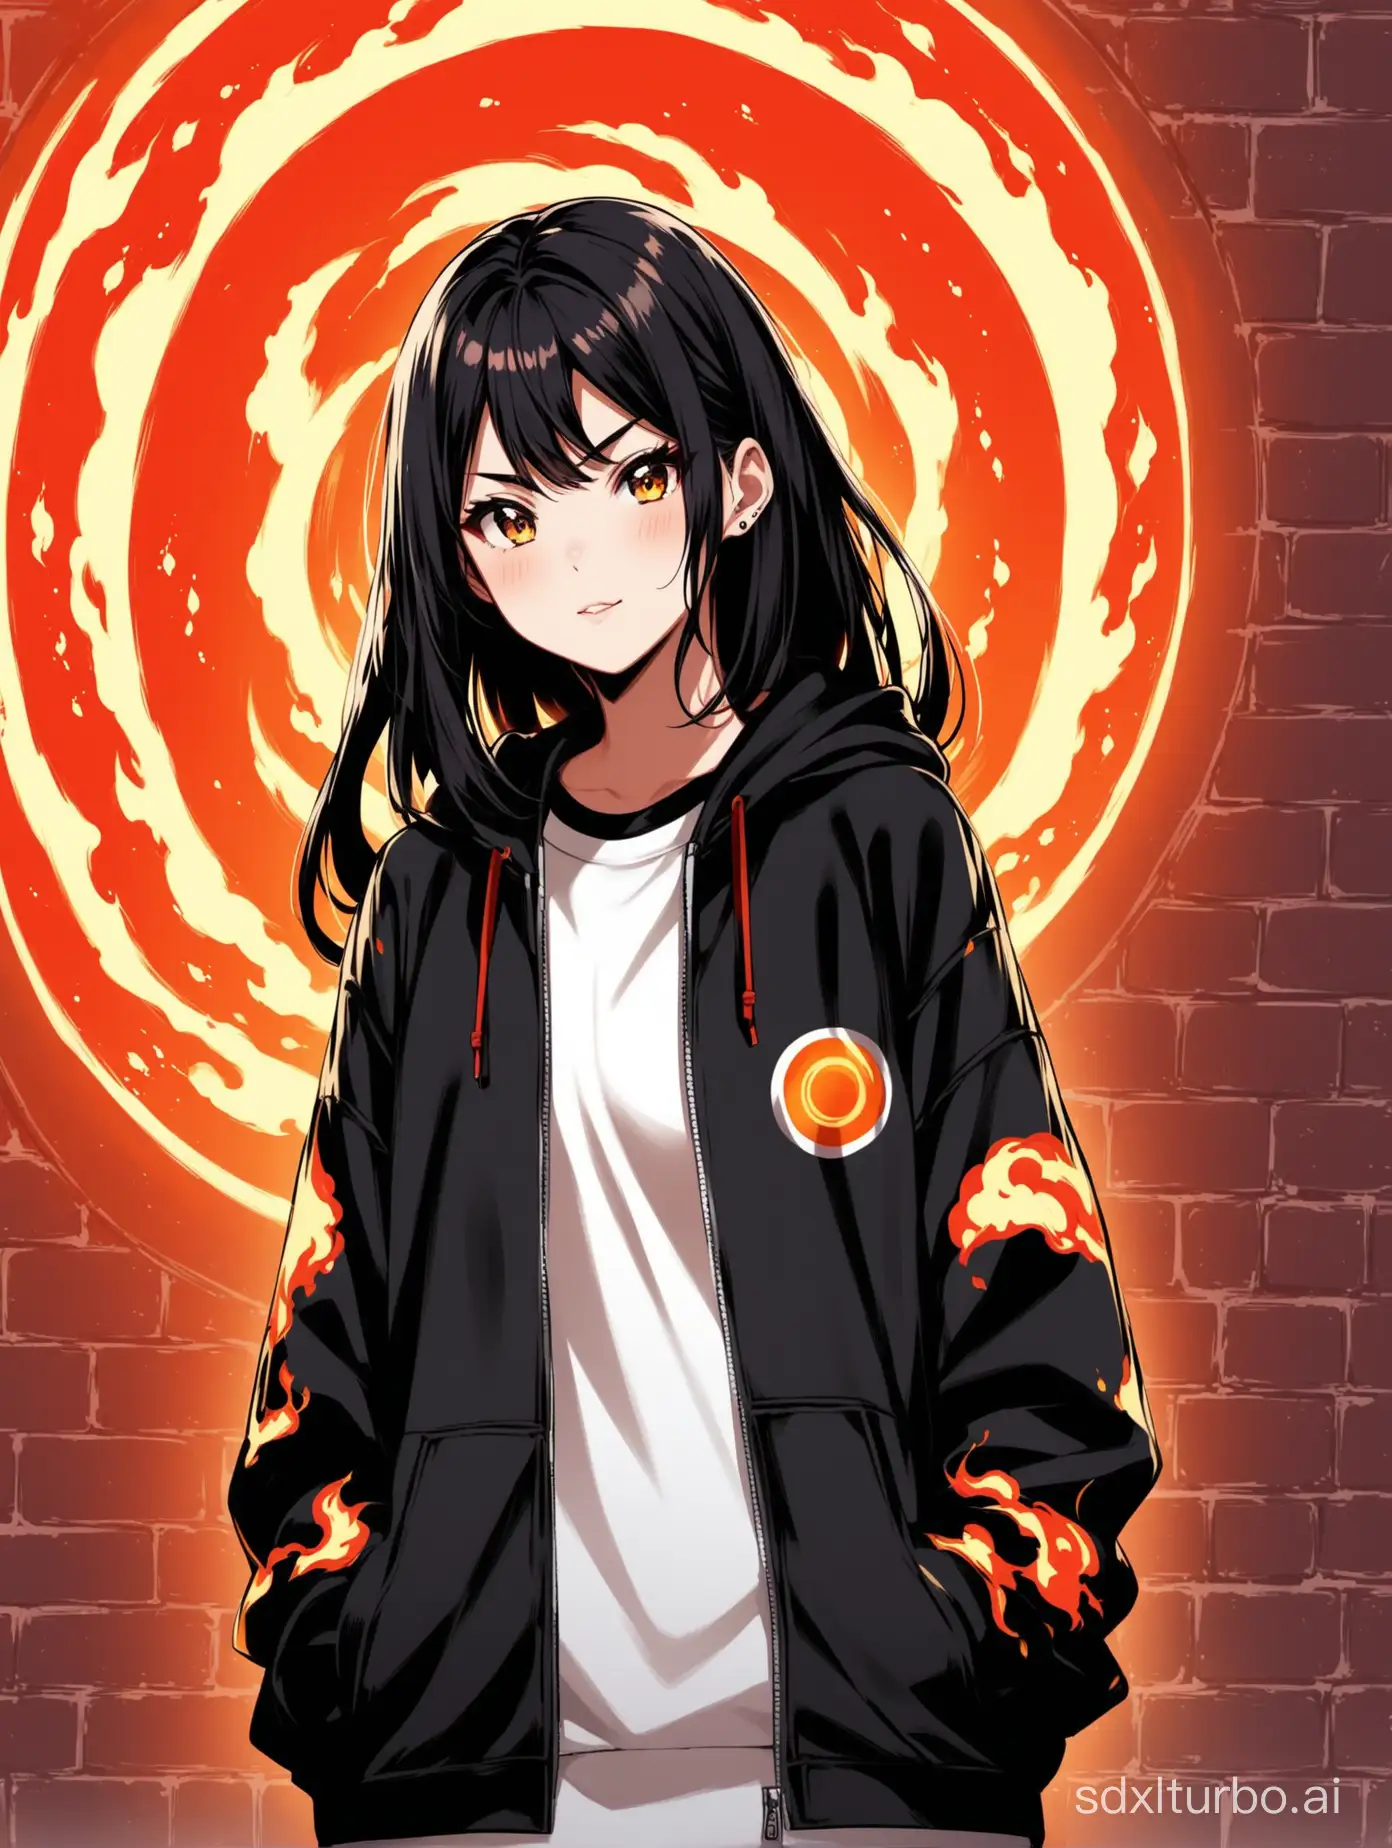 Rei Hino in street wear with fiery circles in the background.